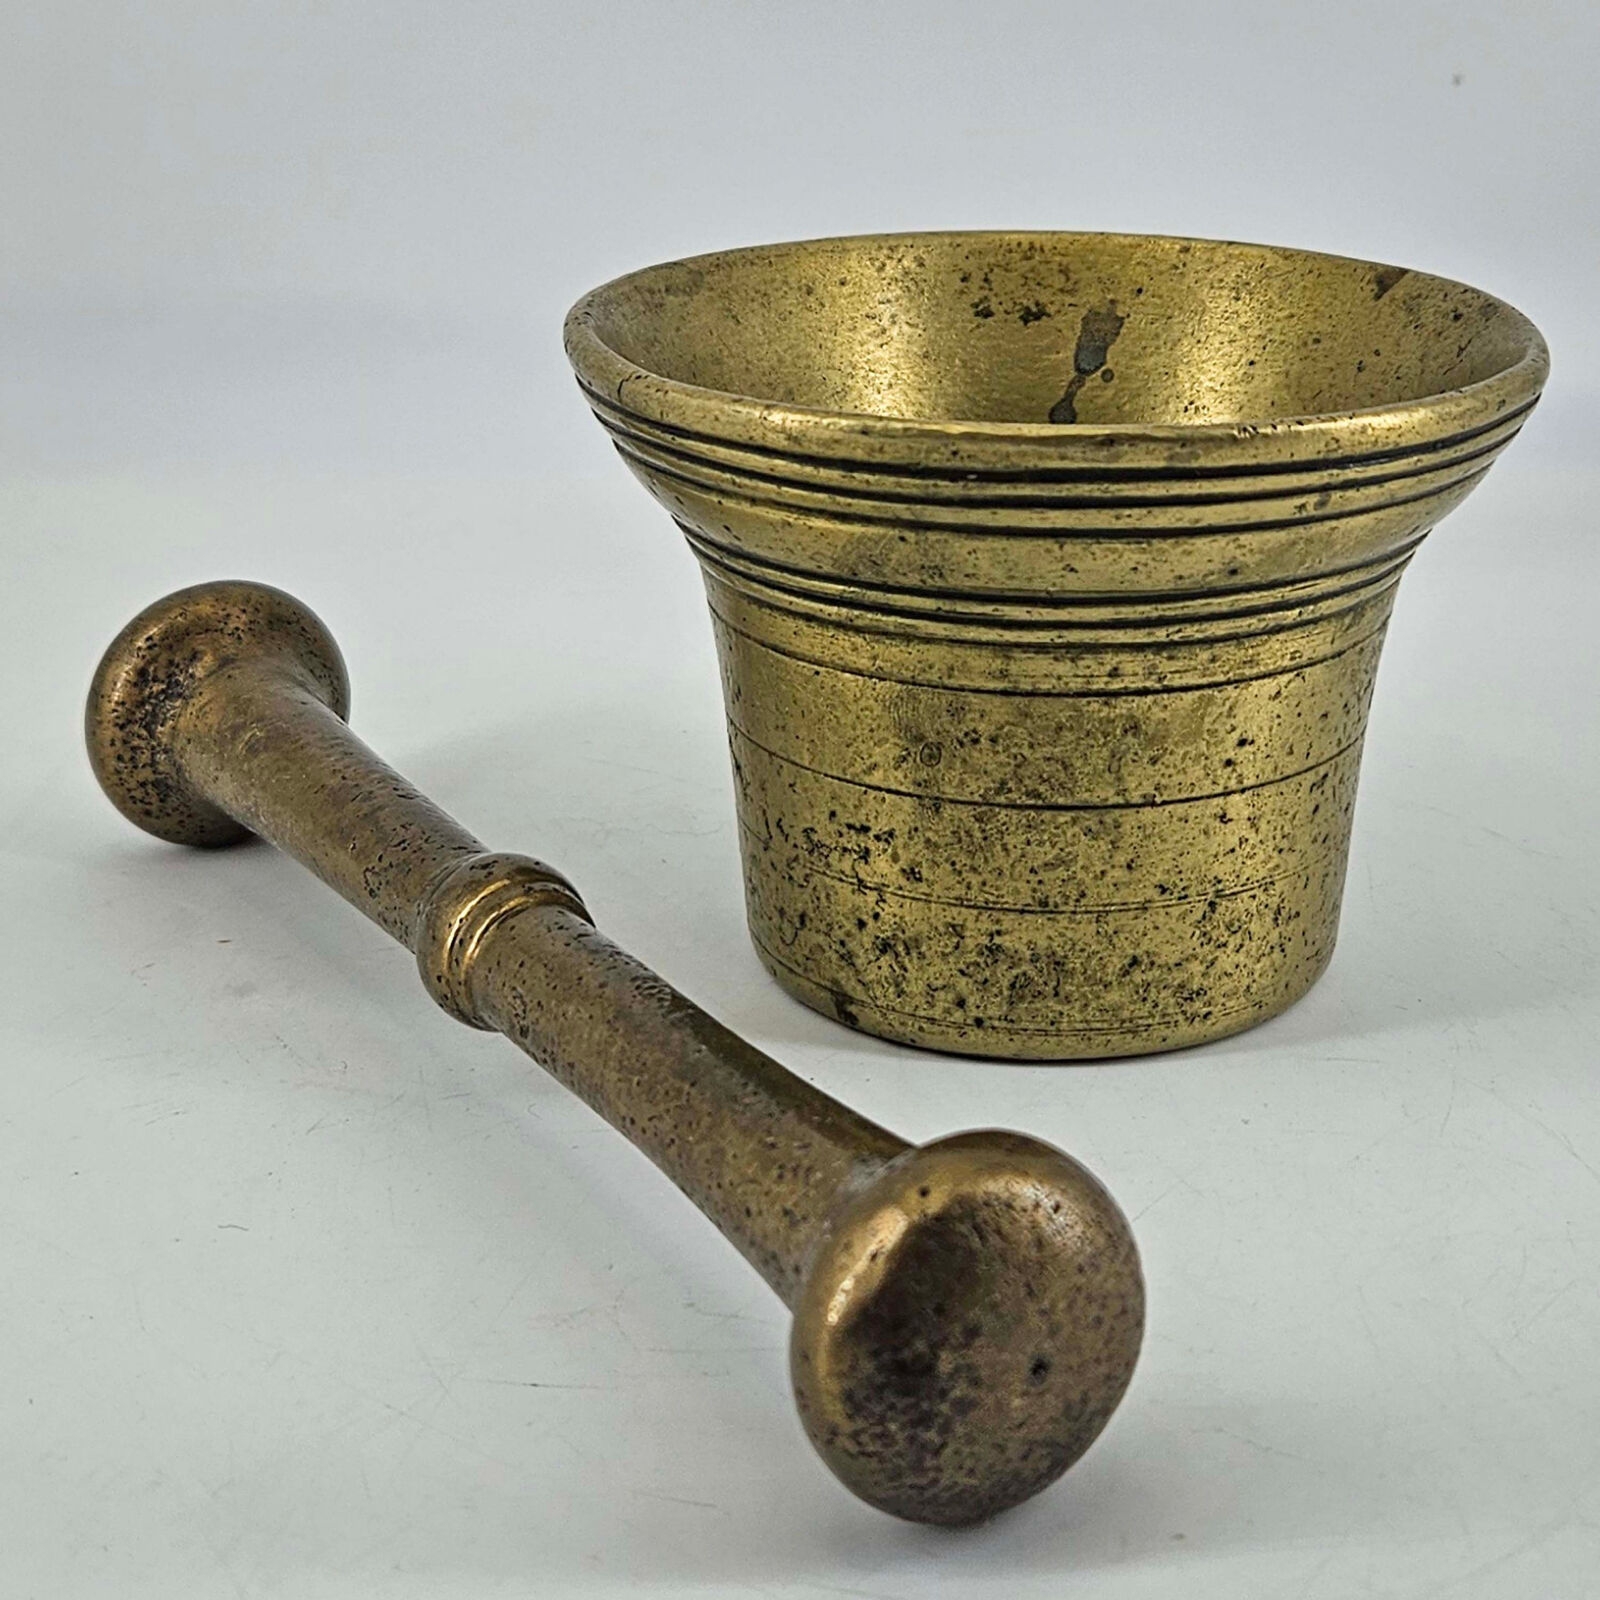 Vintage Heavy Solid Brass Mortar Pestle Pharmacy Apothecary